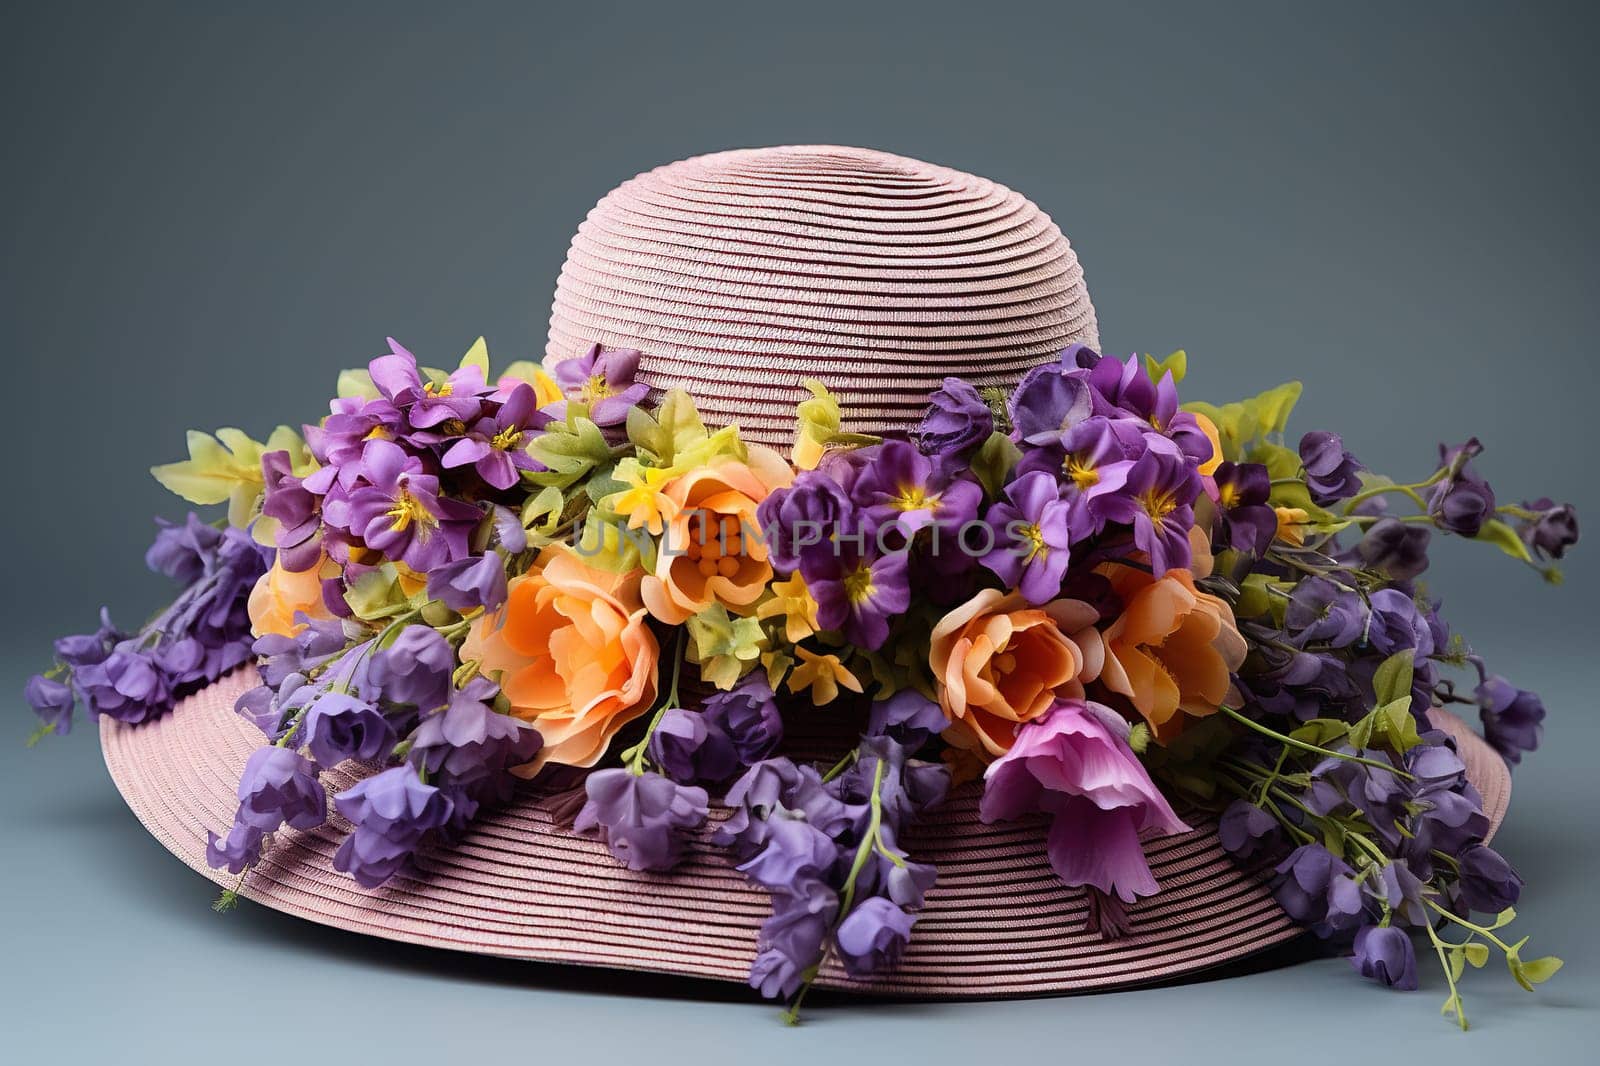 Women's hat with a wide brim and many purple flowers.